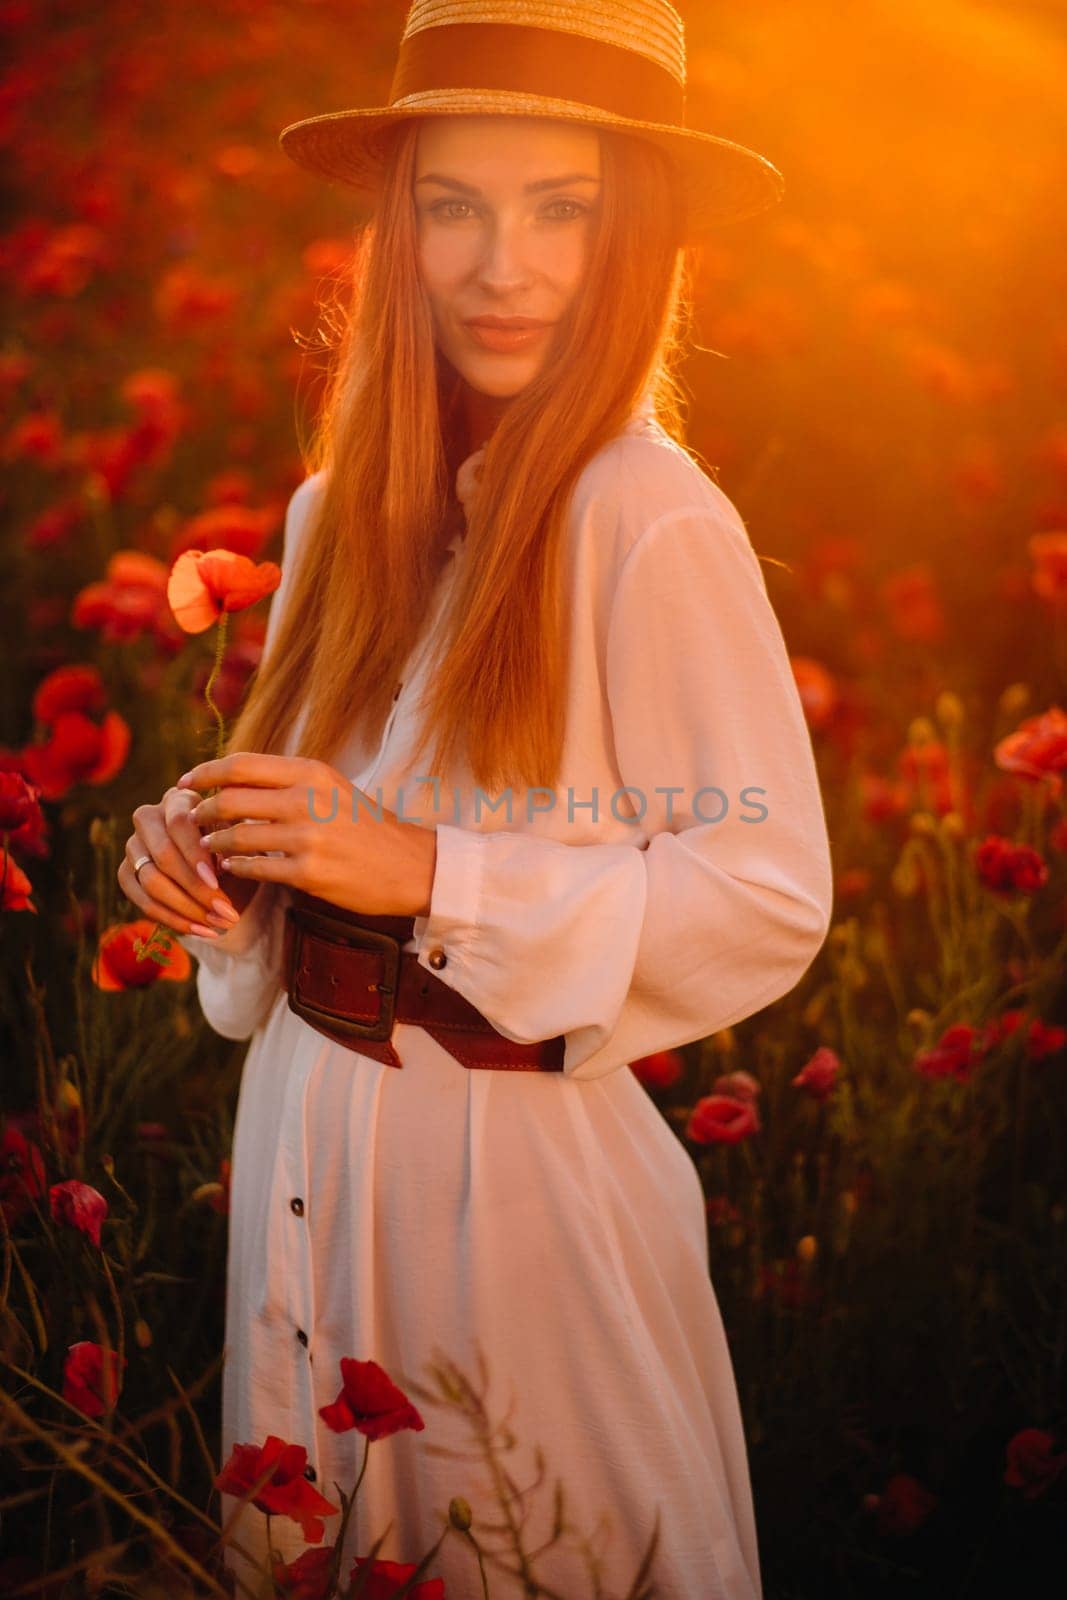 a girl in a white dress and hat stands in a field with poppies at sunset and holds a poppy flower in her hand by Lobachad